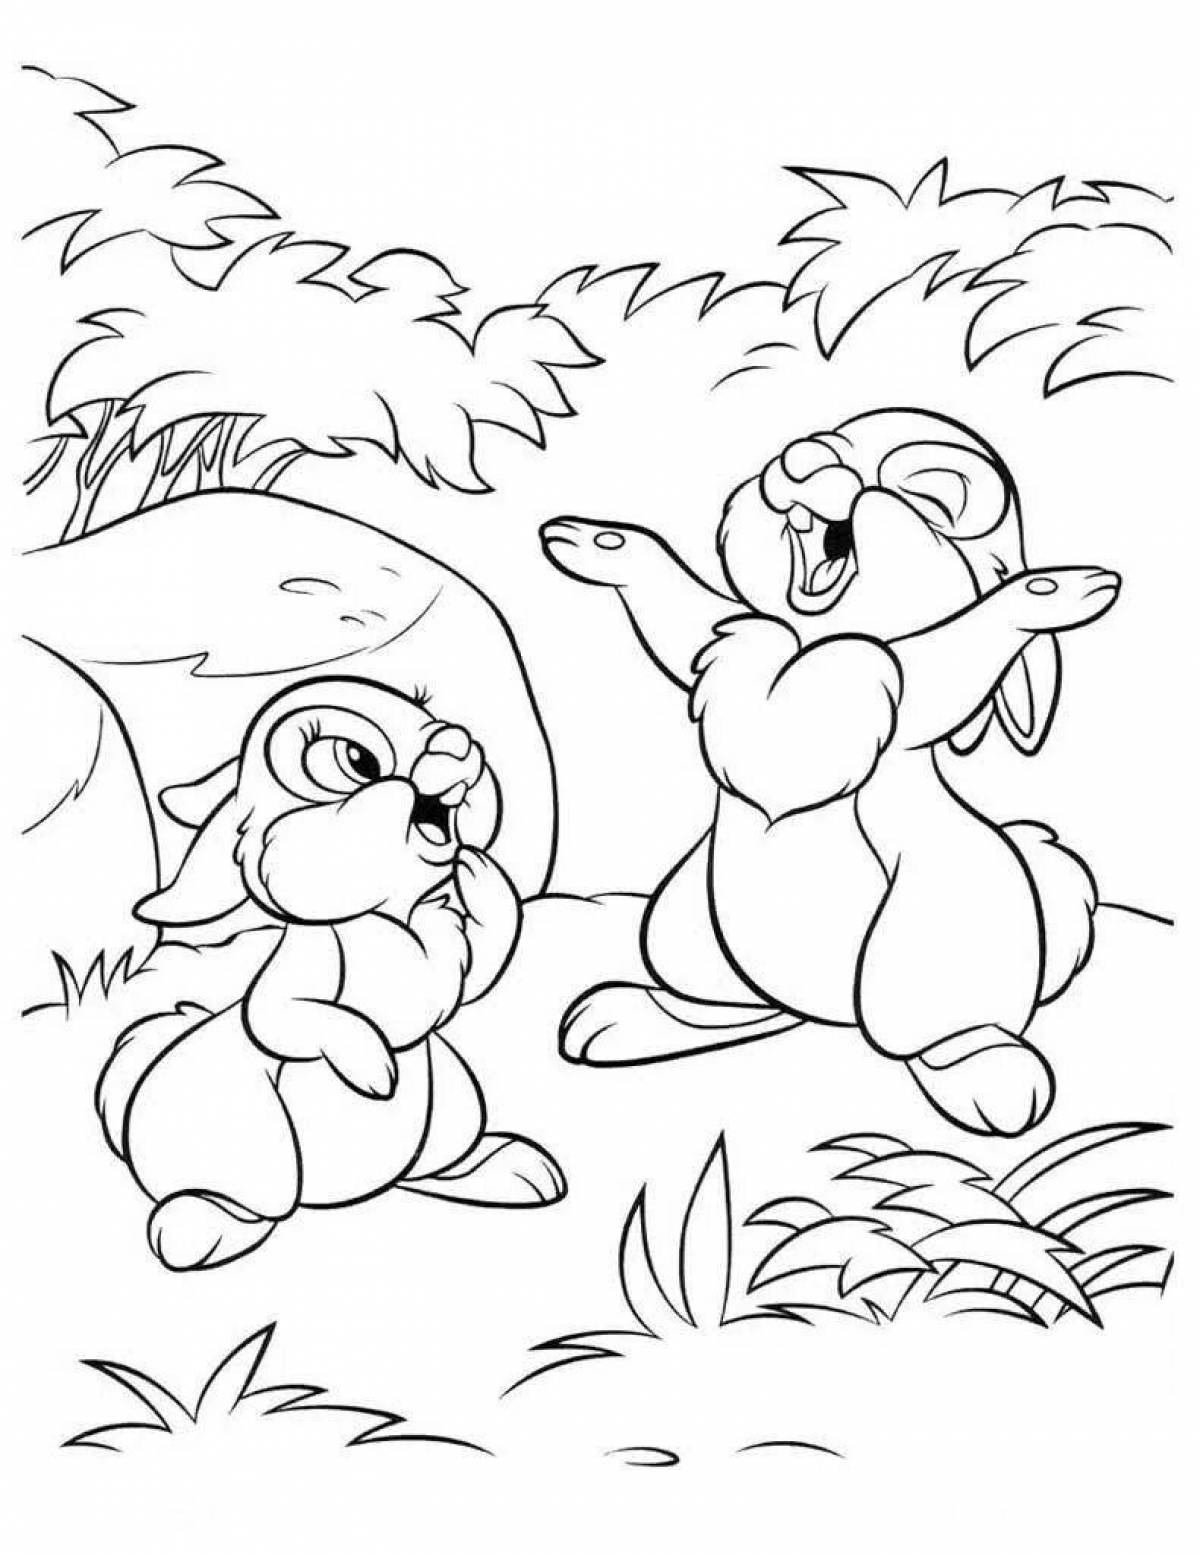 Coloring book unshakable hare